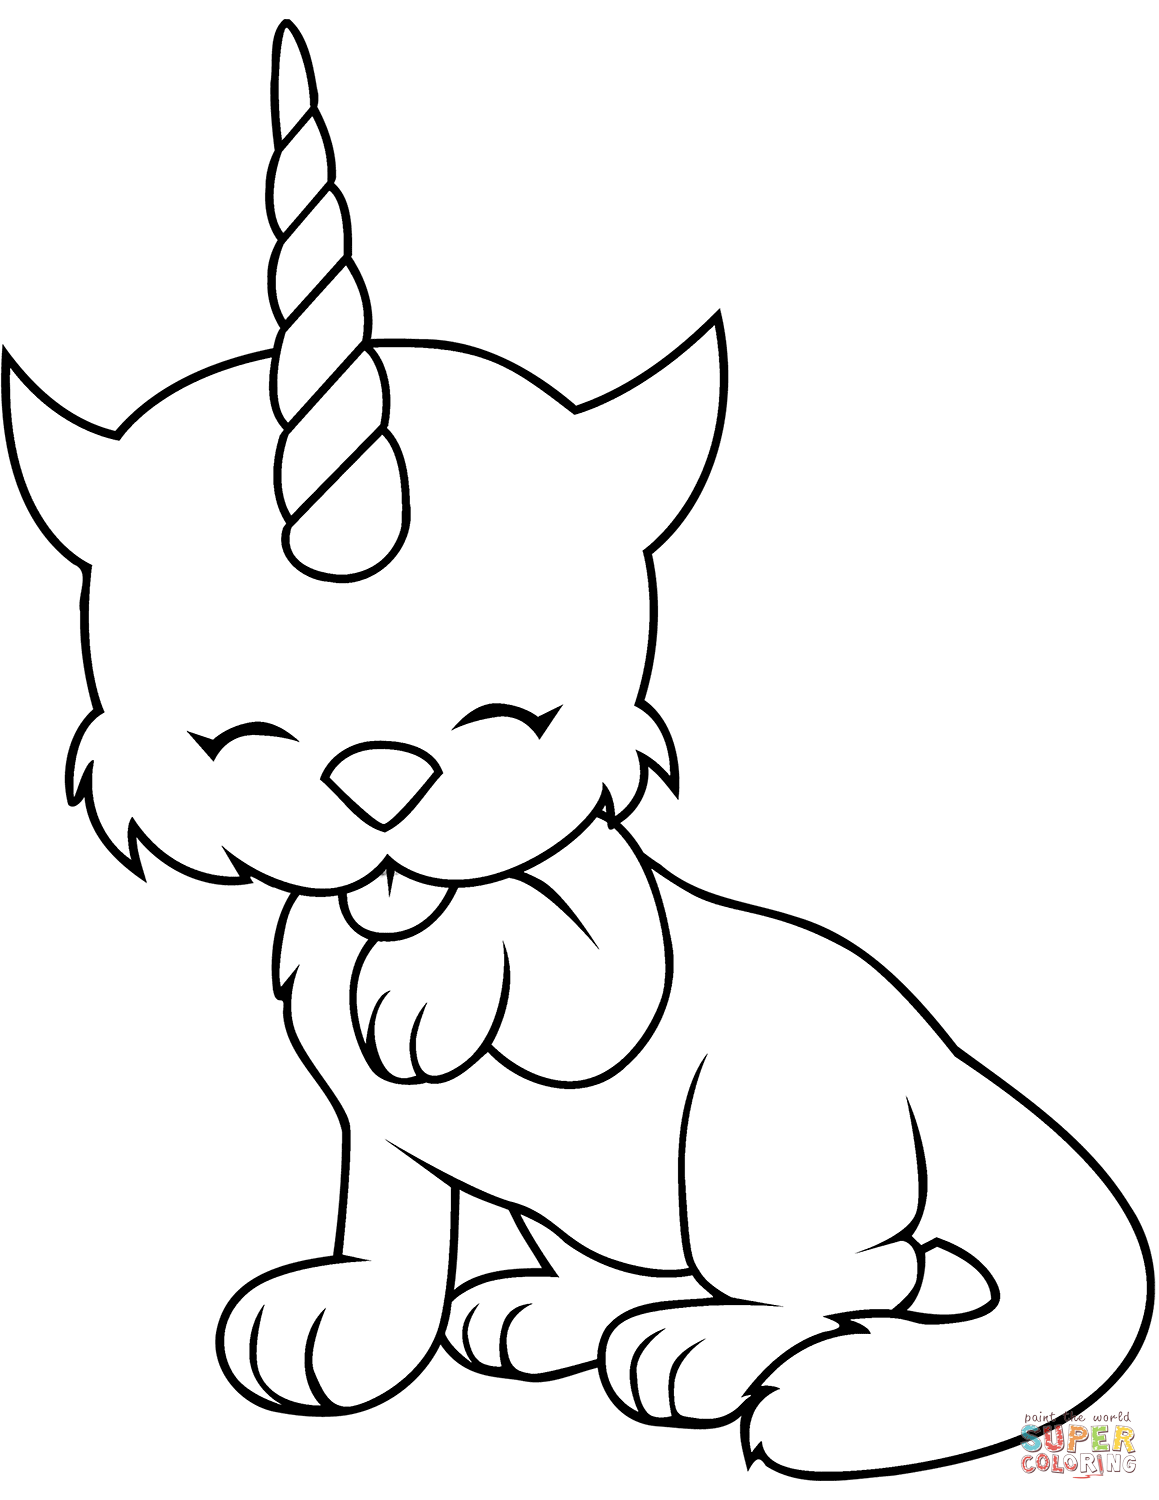 Cat unicorn coloring page free printable coloring pages